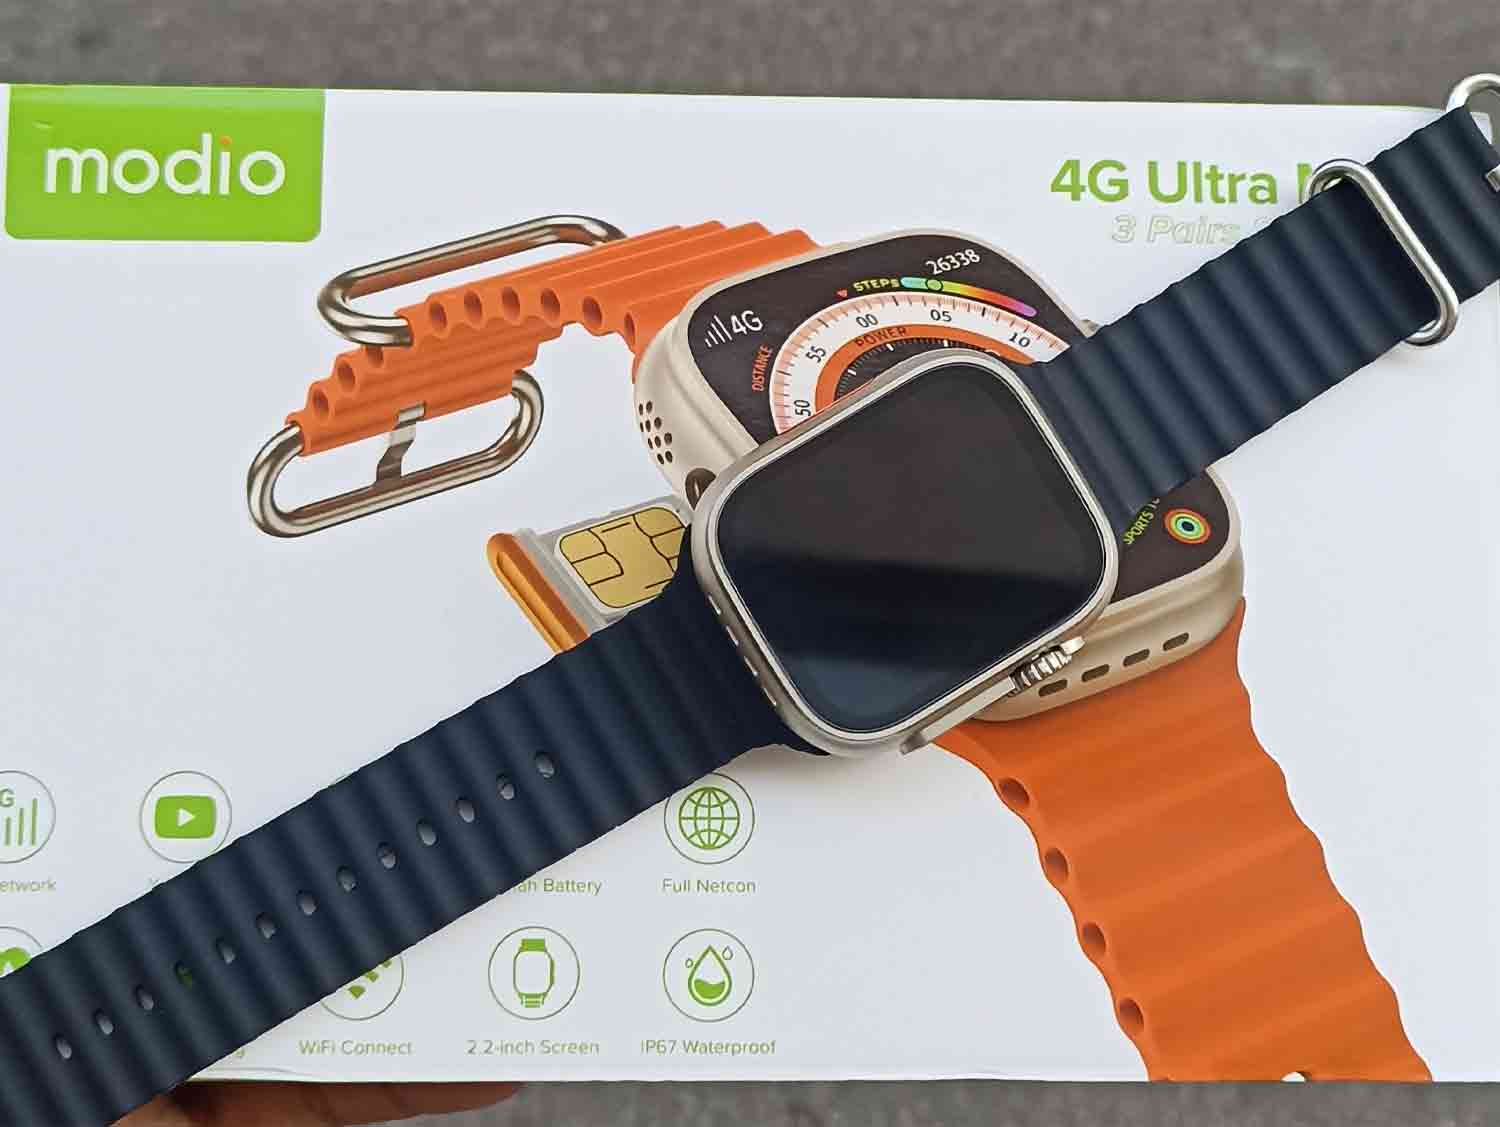 Modio 4G Ultra Android Smart Watch